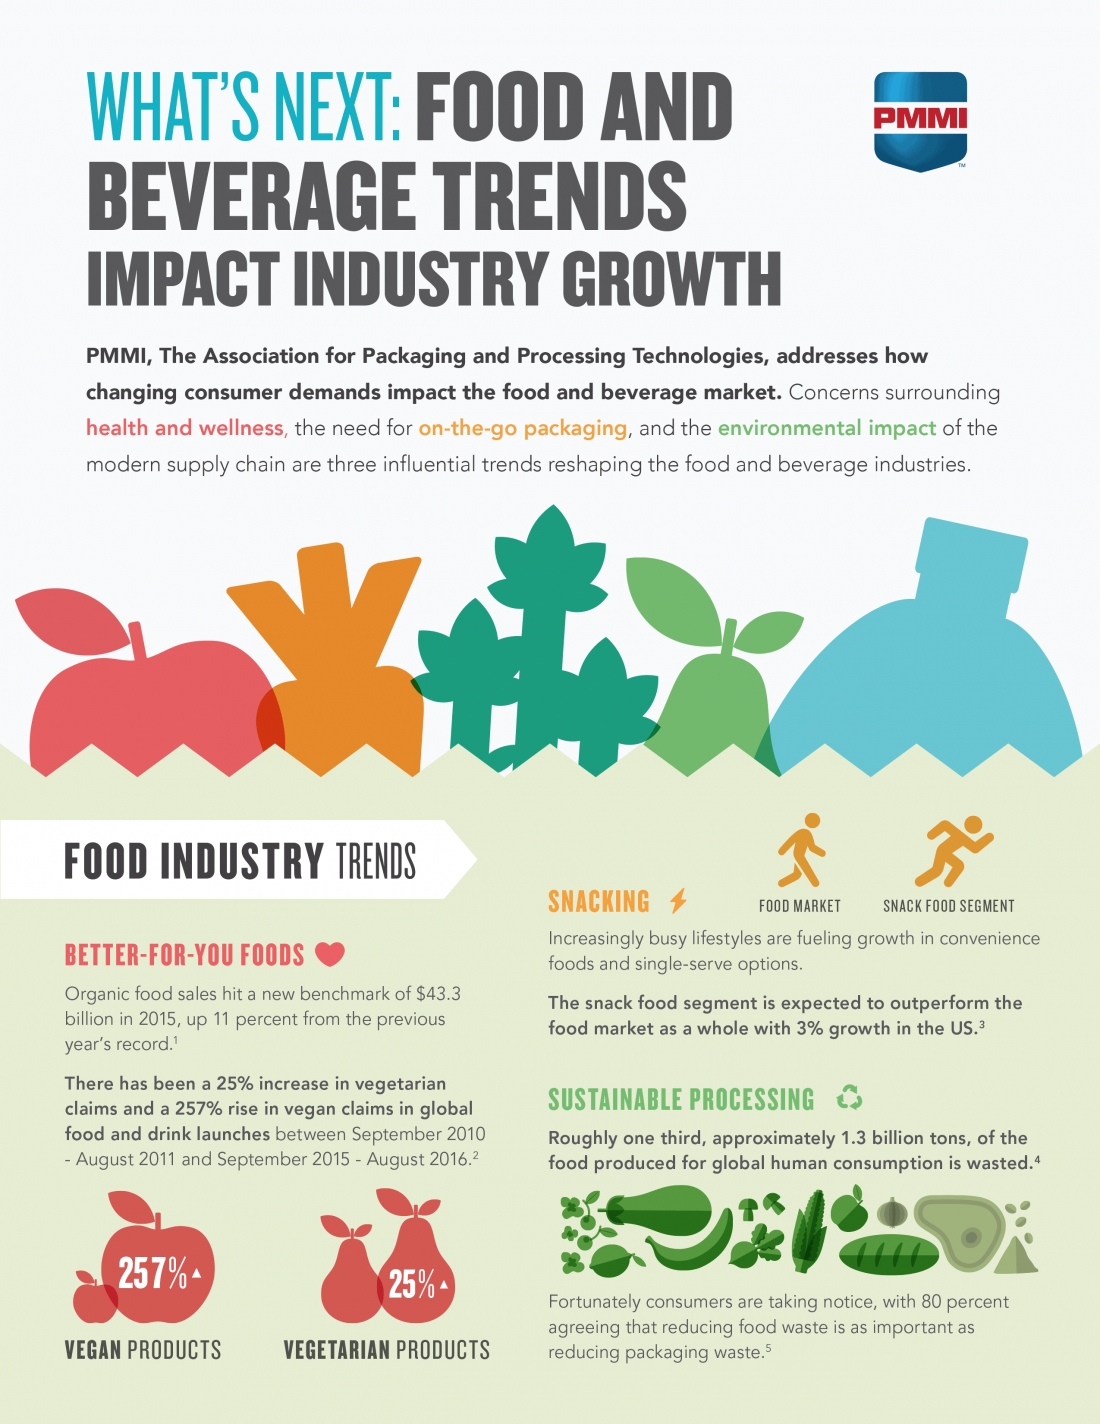 Food and beverage packaging trends